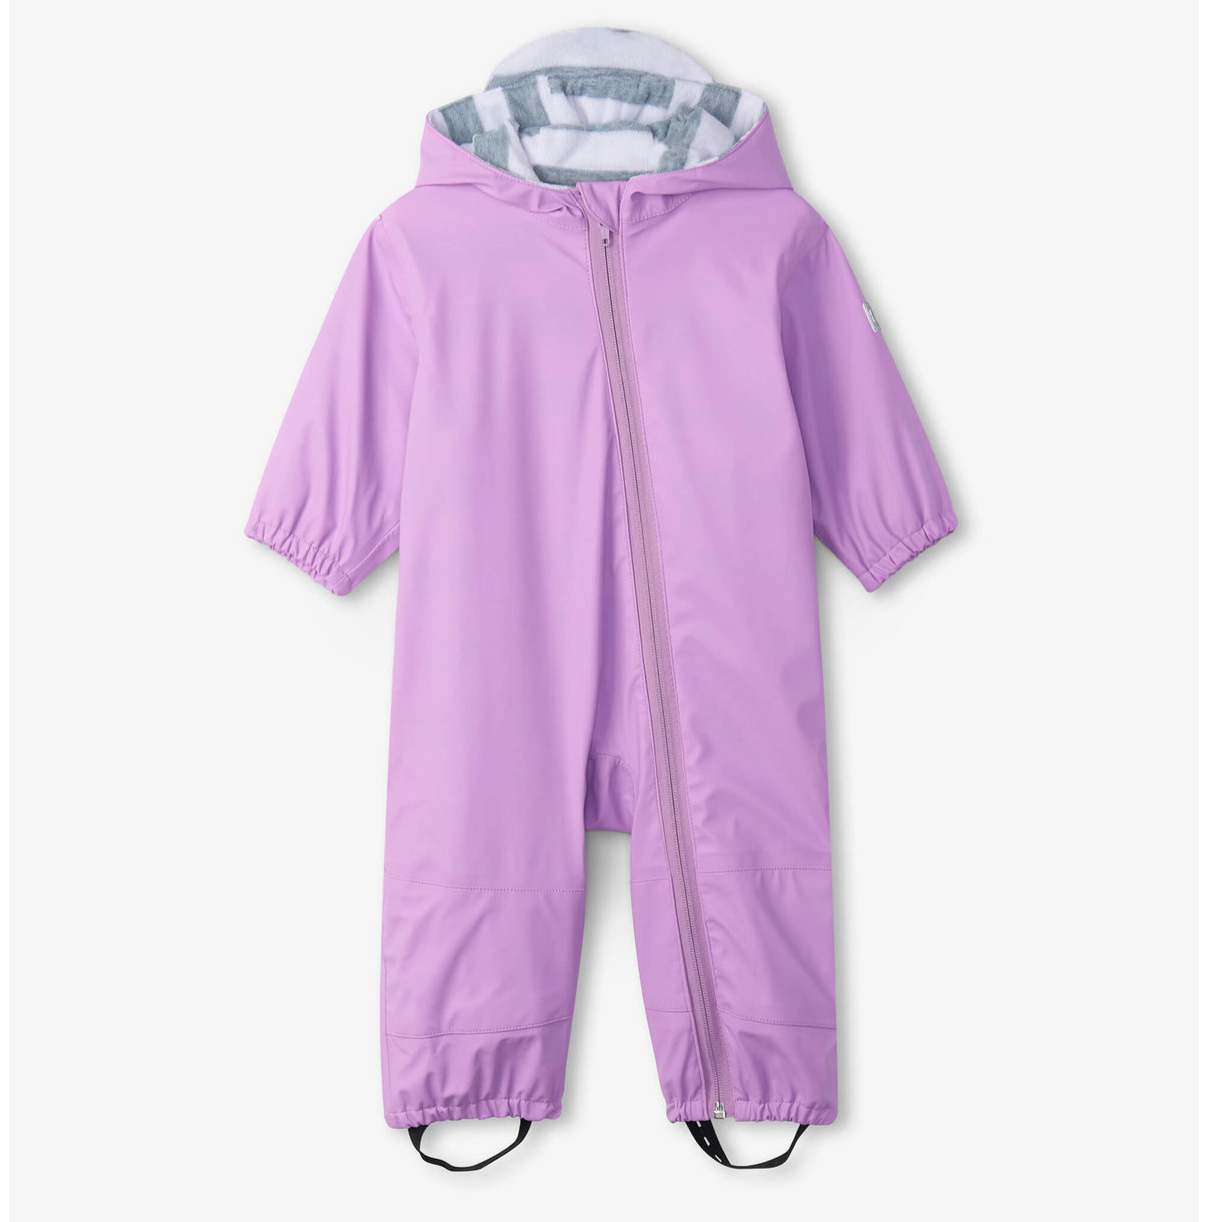 HATLEY Lilac Terry Lined Baby Rain Suit